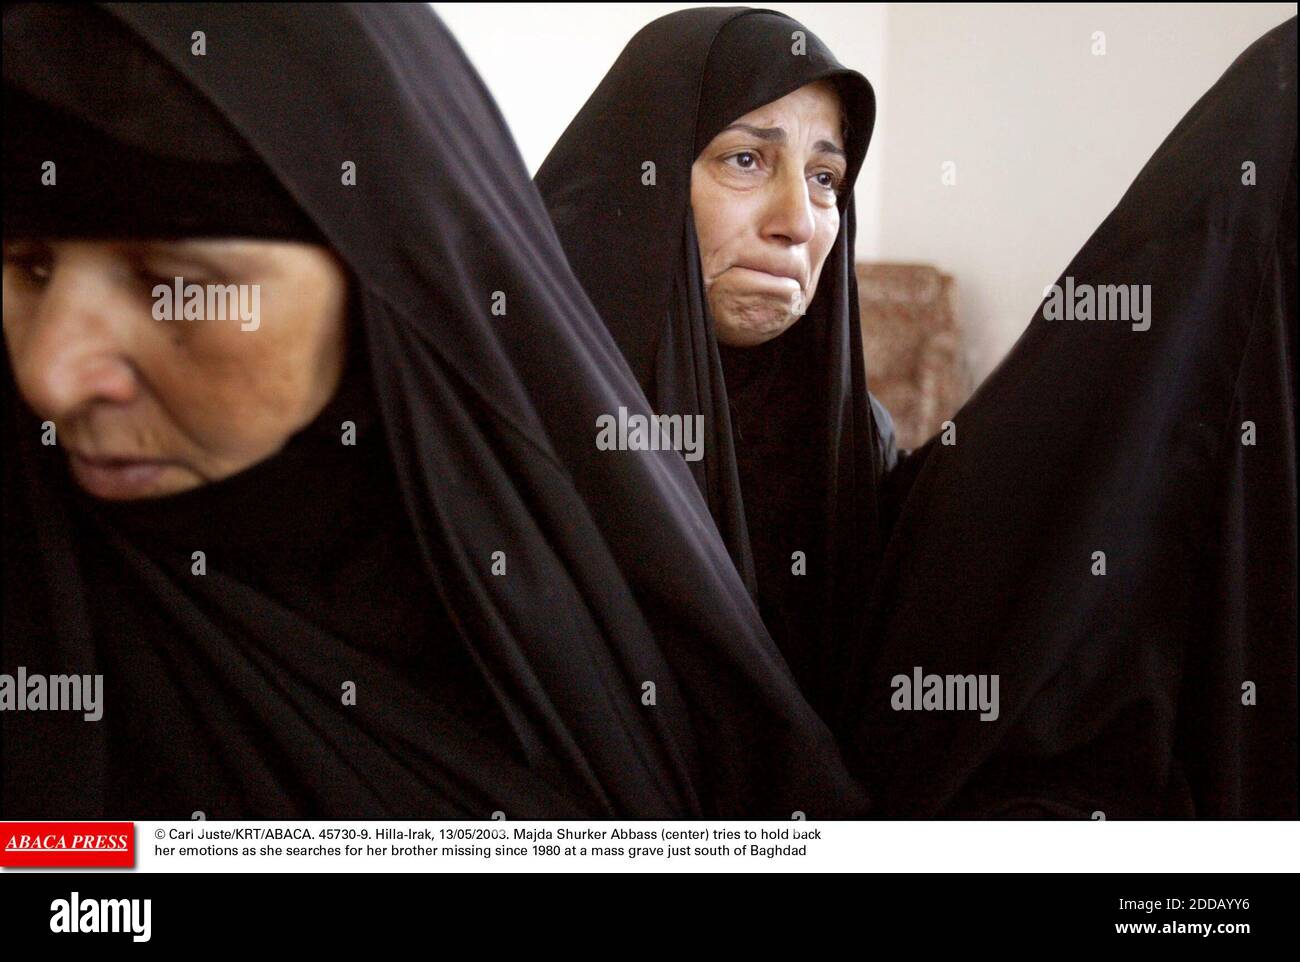 NO FILM, NO VIDEO, NO TV, NO DOCUMENTARY - © Carl Juste/KRT/ABACA. 45730-9. Hilla-Irak, 13/05/2003. Majda Shurker Abbass (center) tries to hold back her emotions as she searches for her brother missing since 1980 at a mass grave just south of Baghdad Stock Photo